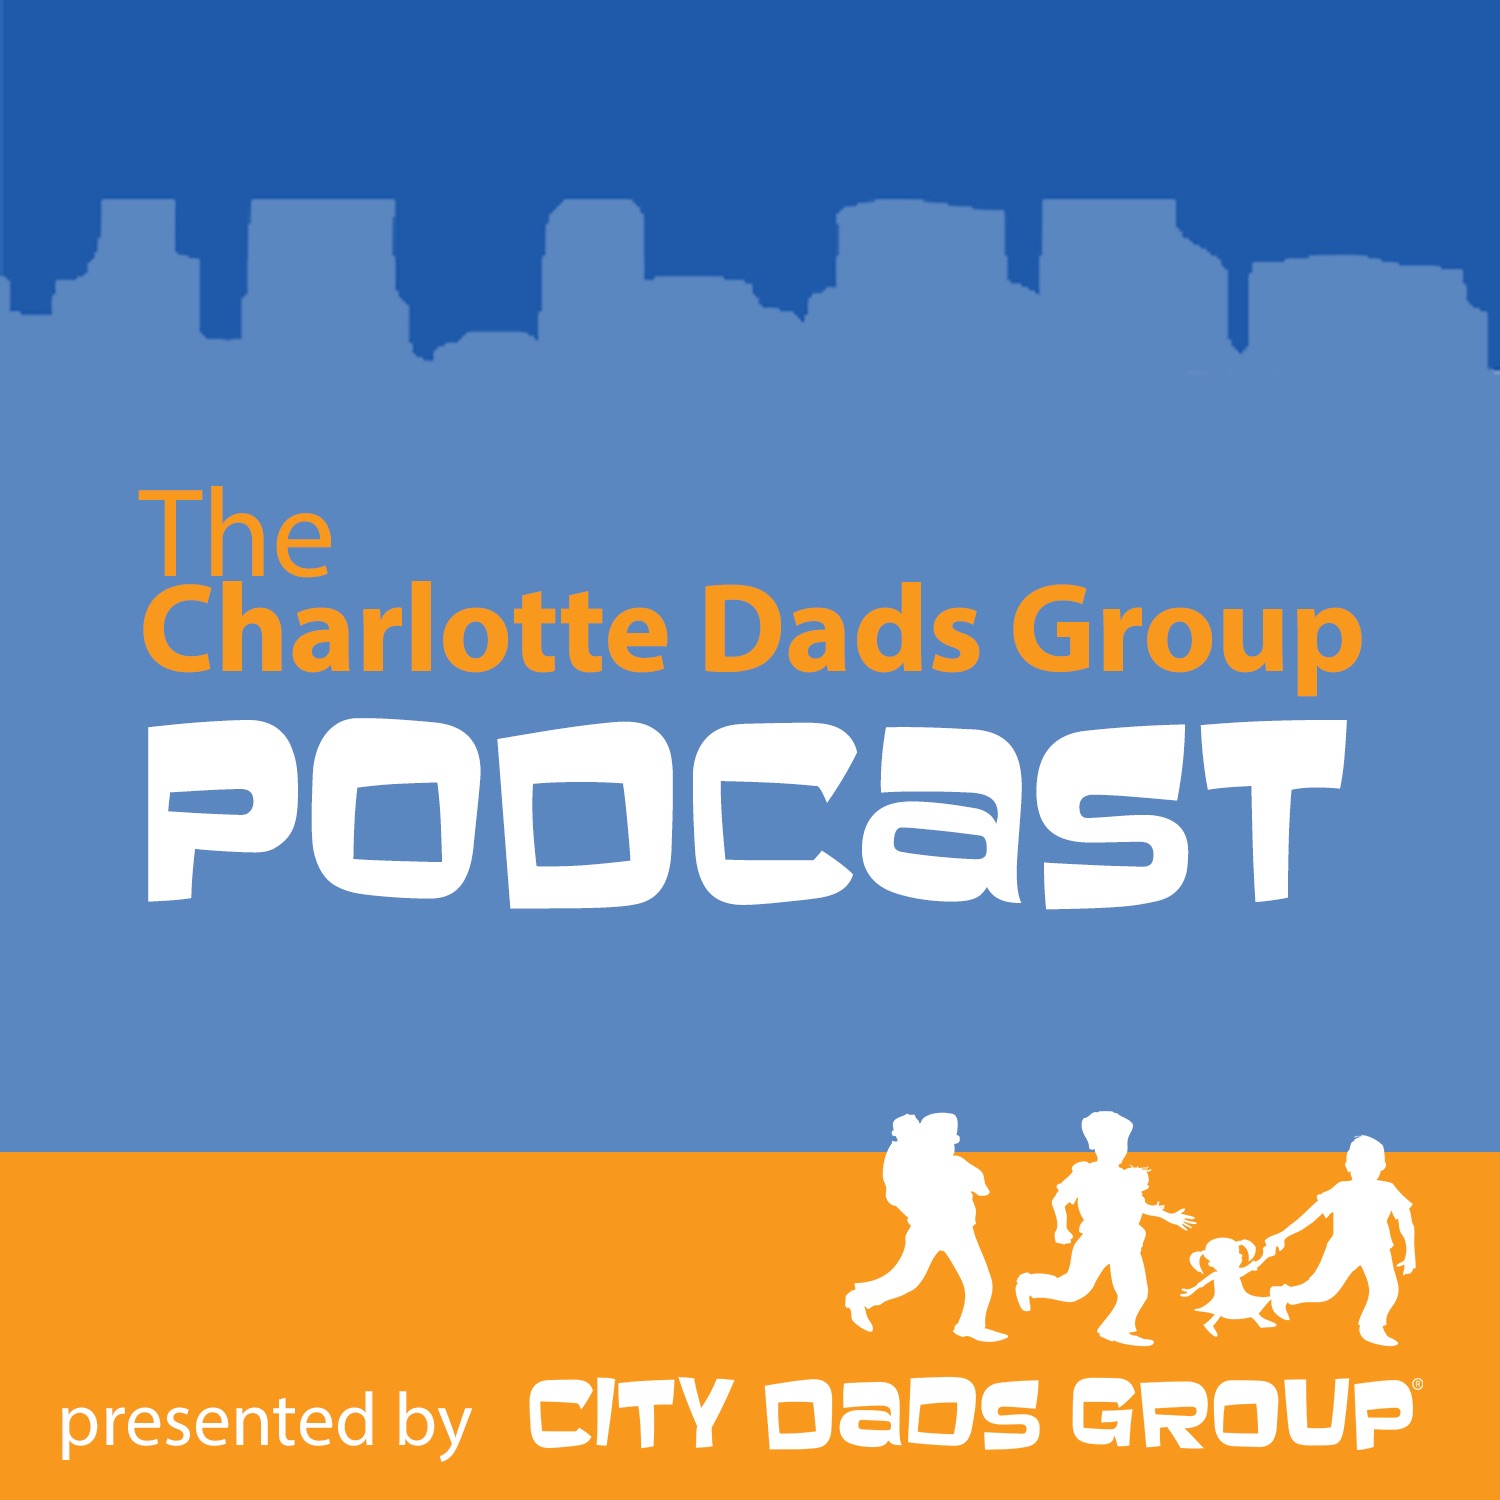 The Charlotte Dads Group Podcast